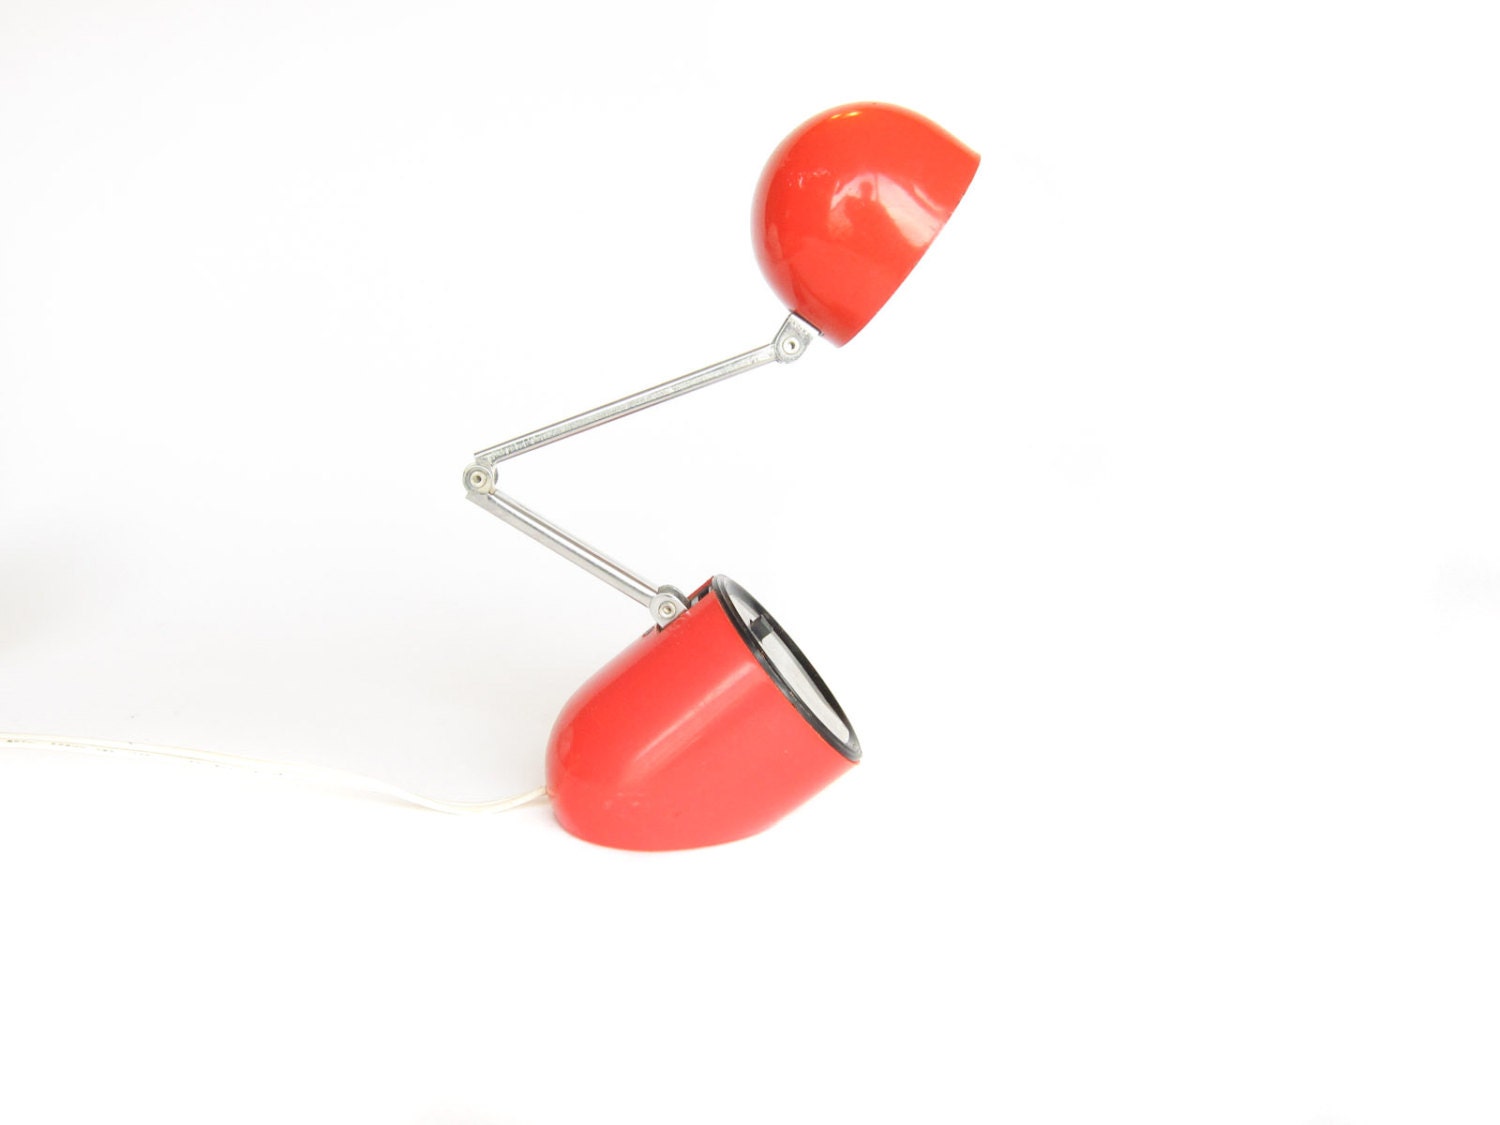 Vintage Red Small Adjustable Eyeball Task Lamp from 1970s - pastoria